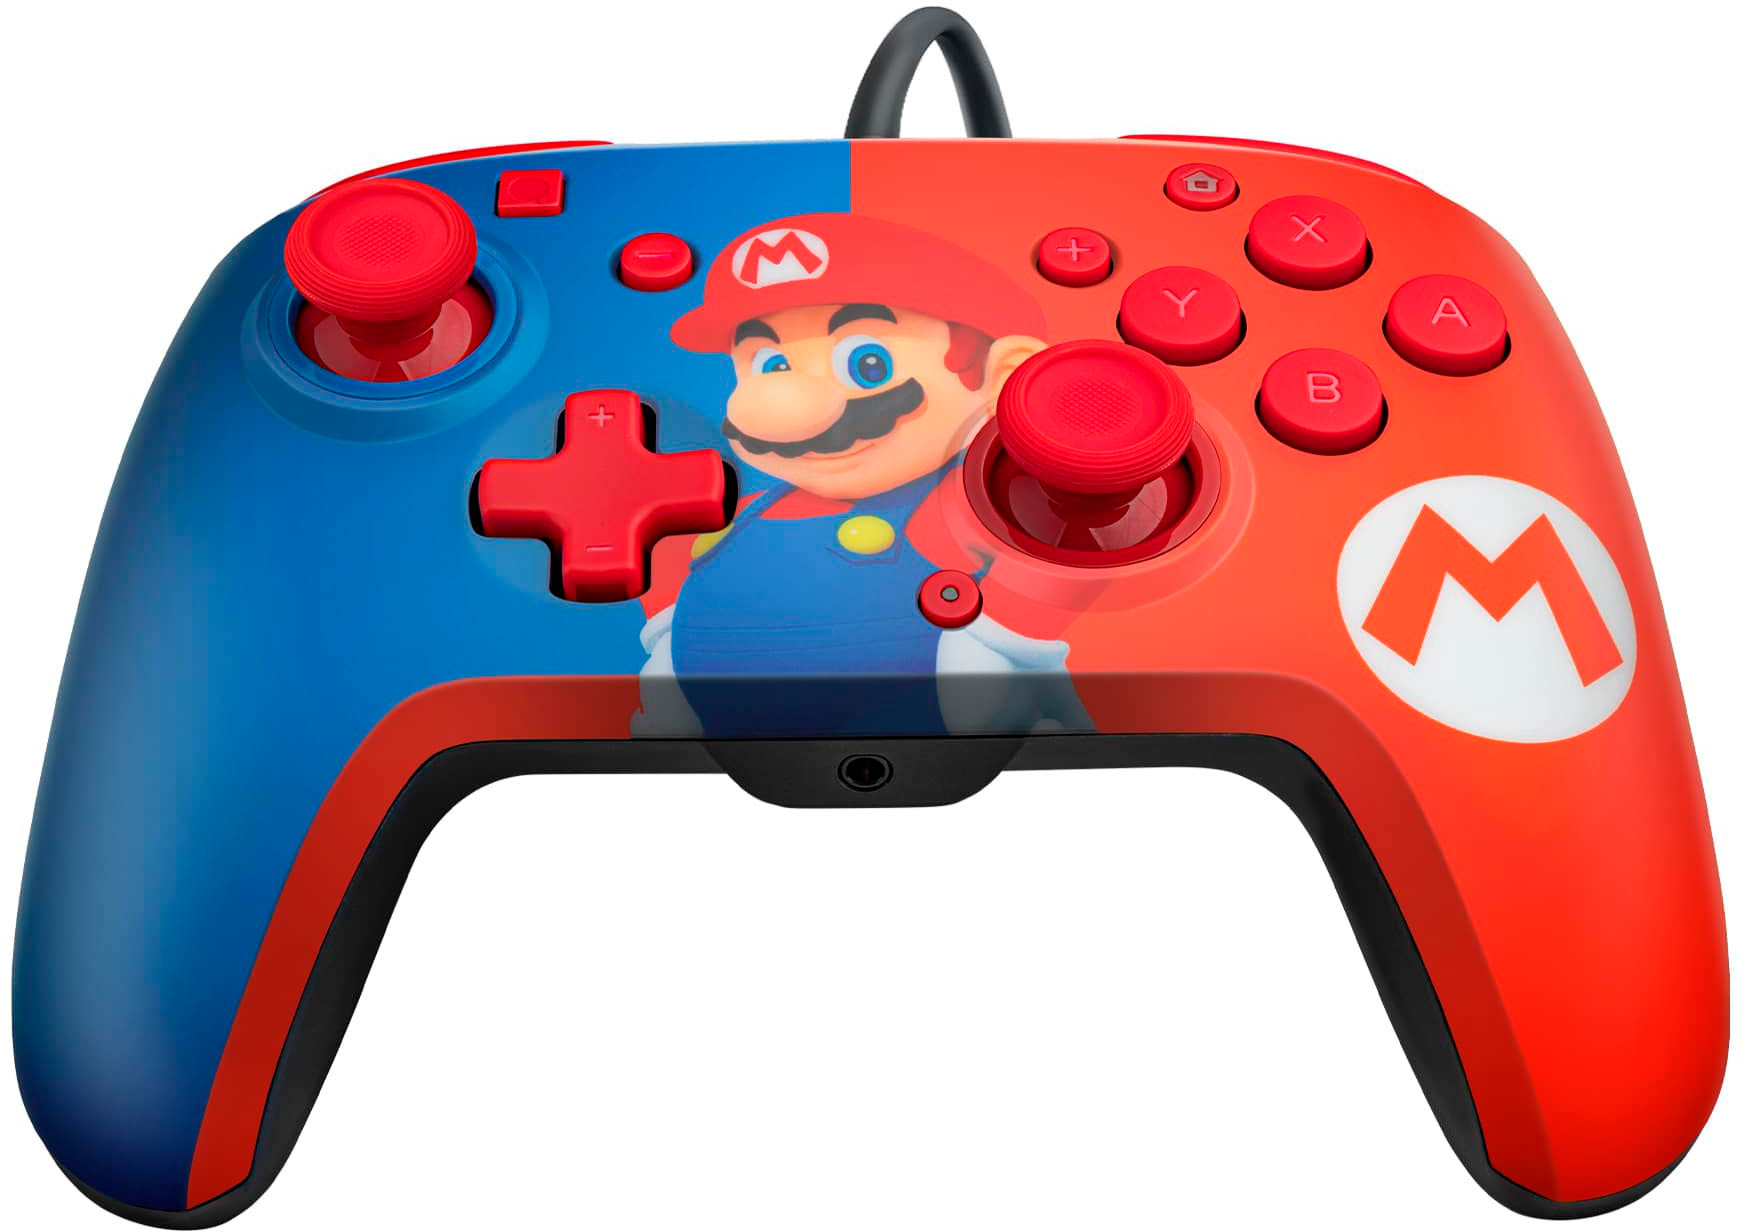 Super Mario 3D World + Bowser's Fury  Pro Controller + Switch OLED  gameplay 